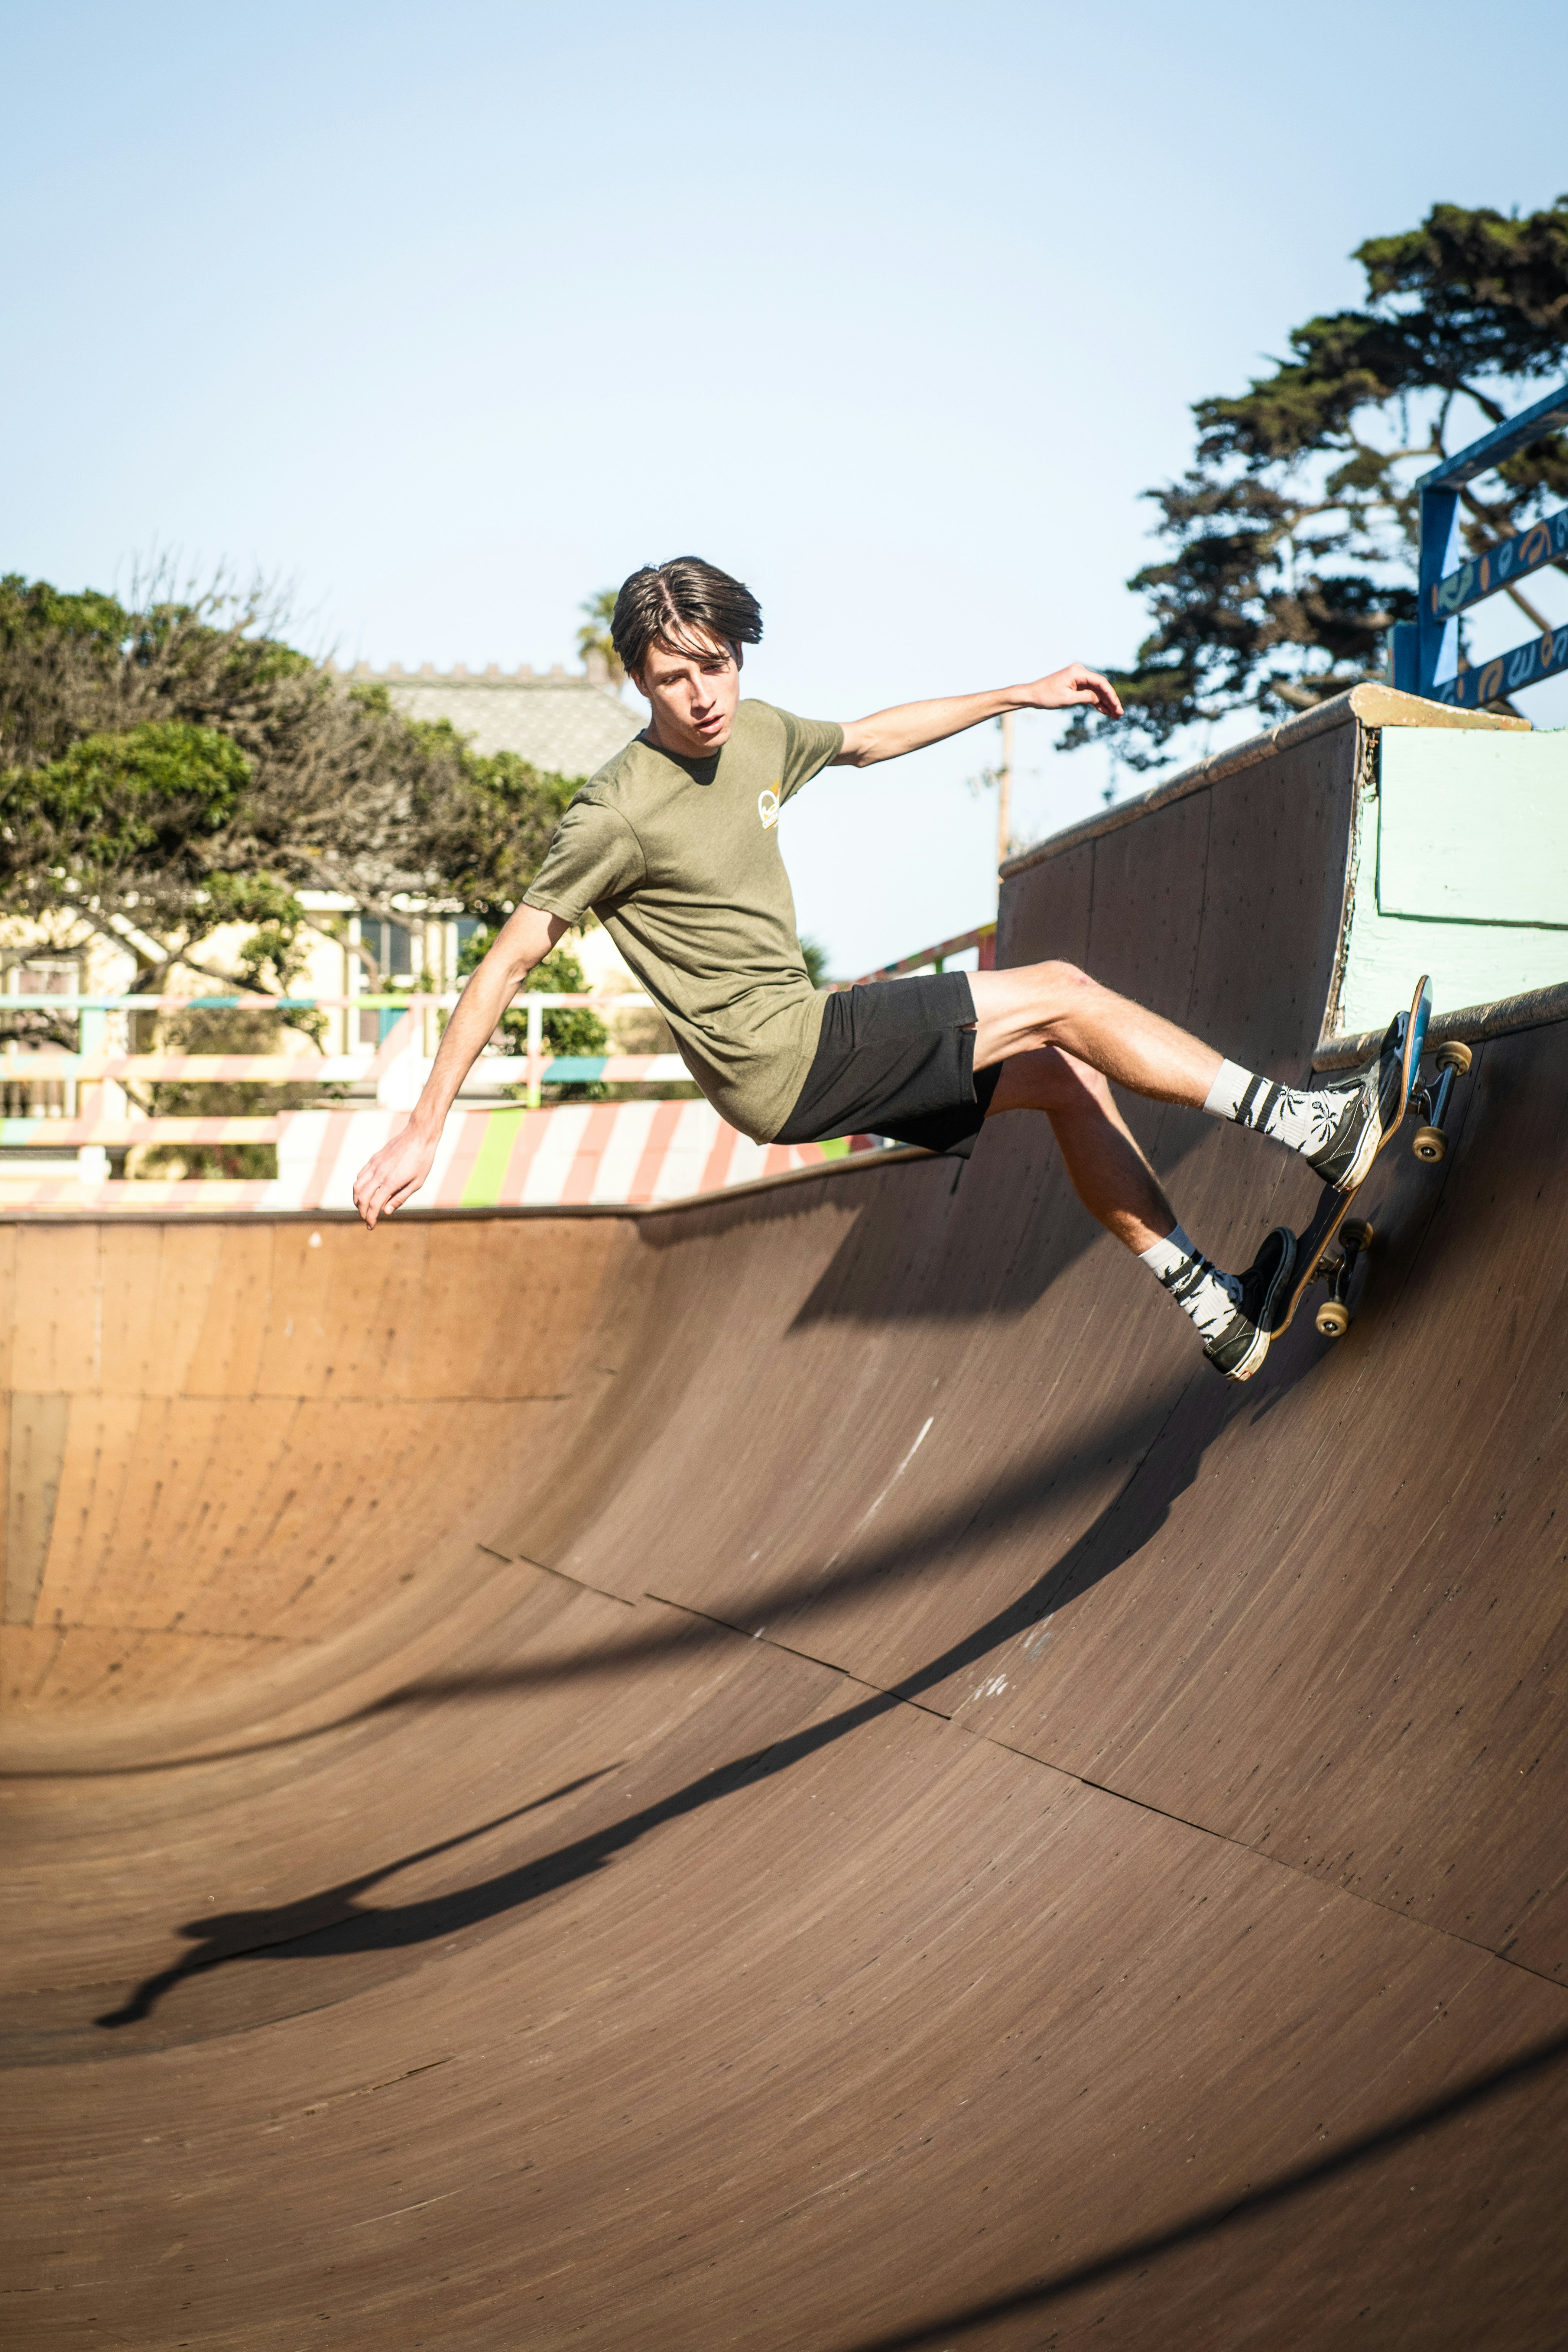 man in green t-shirt and black shorts riding skateboard during daytime